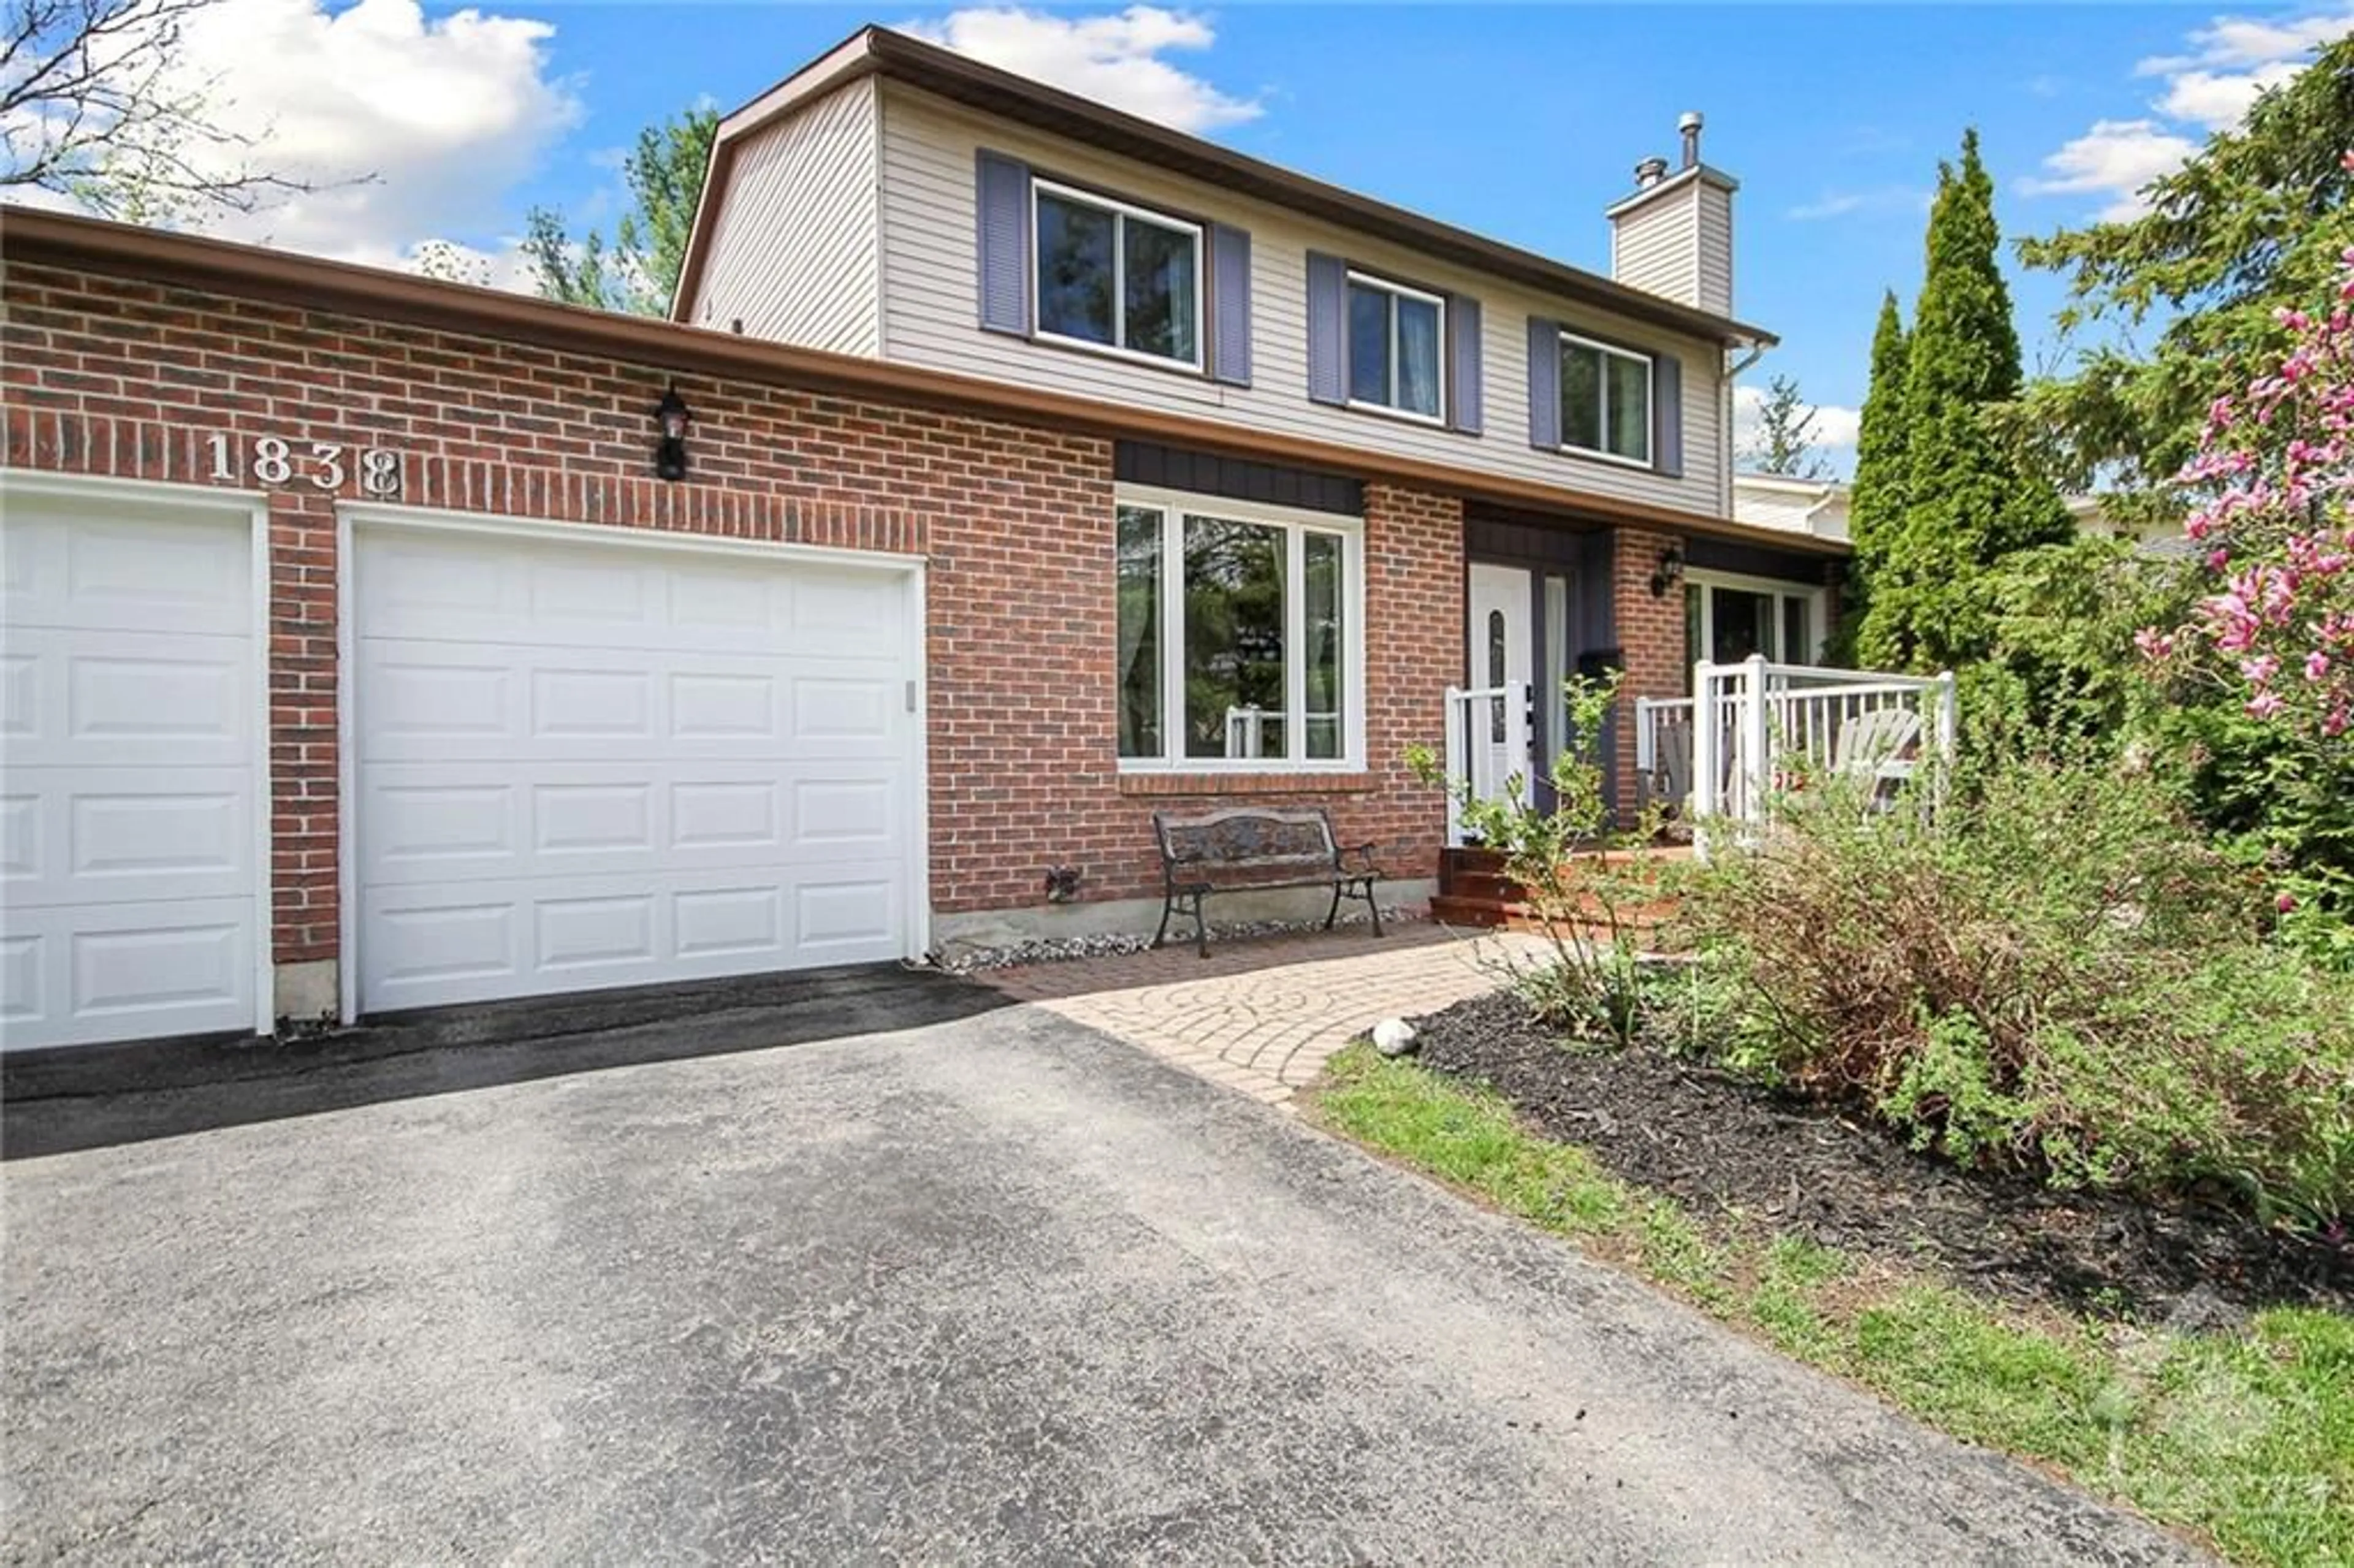 Home with brick exterior material for 1838 WOODHAVEN Hts, Ottawa Ontario K1E 2W2